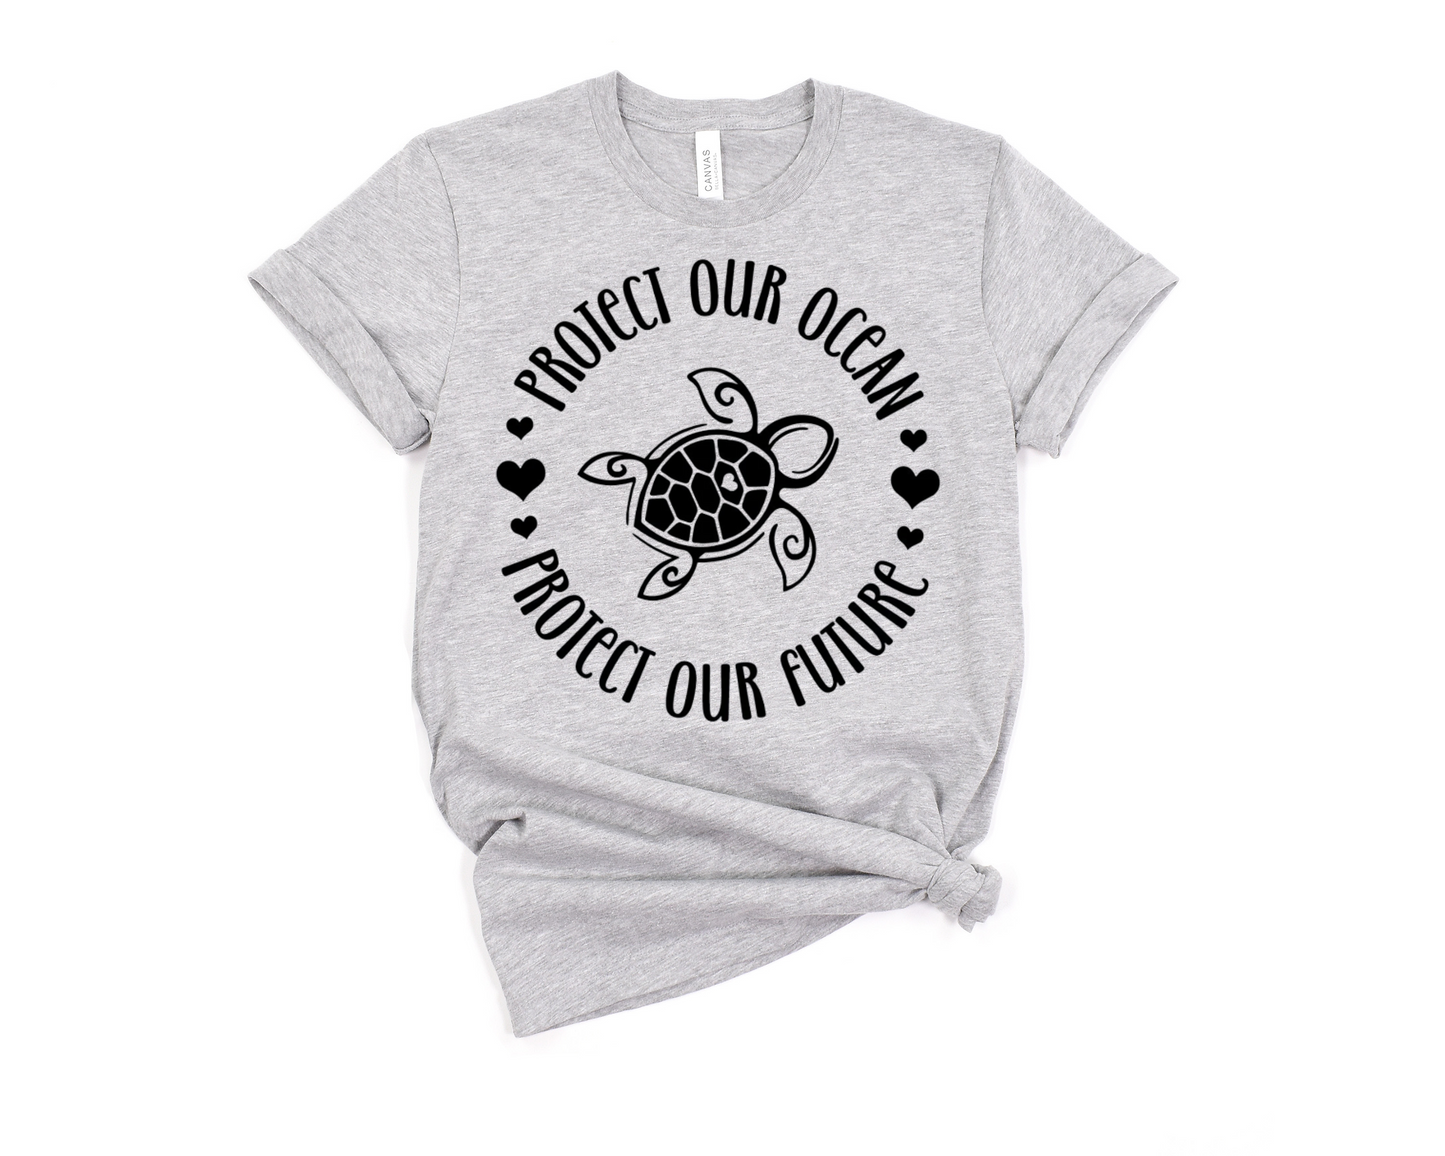 Protect Our Ocean T-Shirt